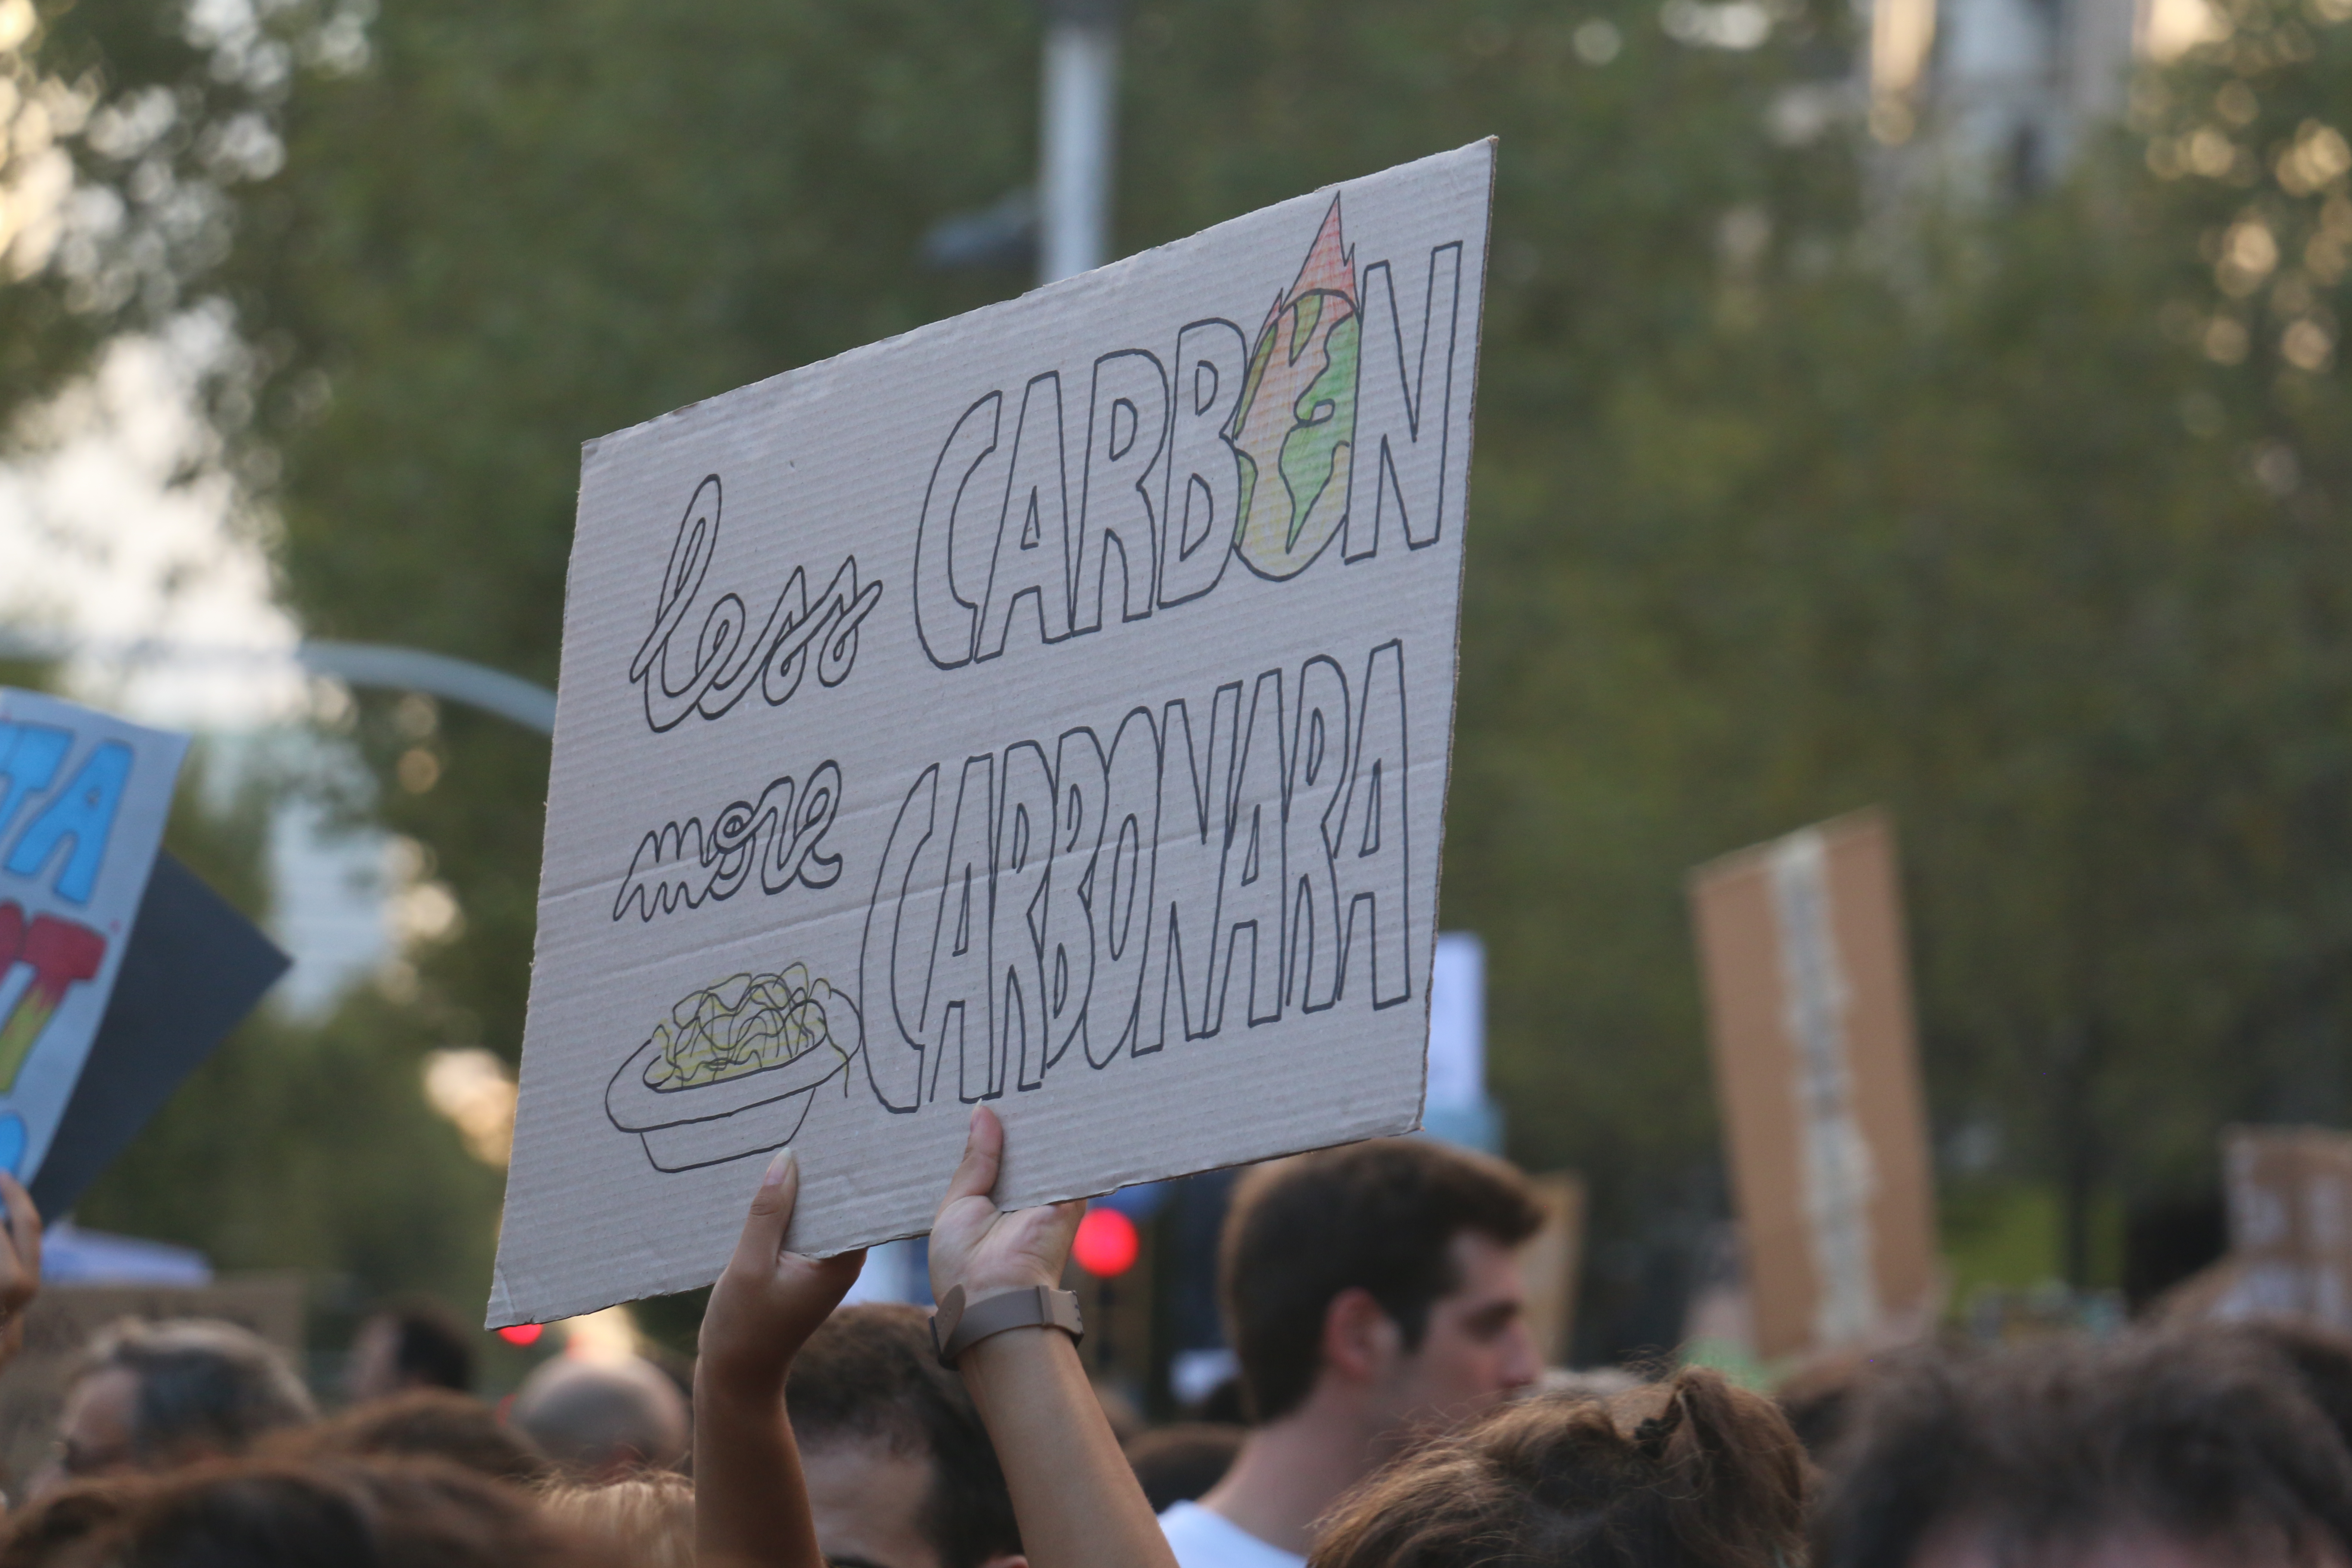 People holding a sign saying less carbon more carbonara